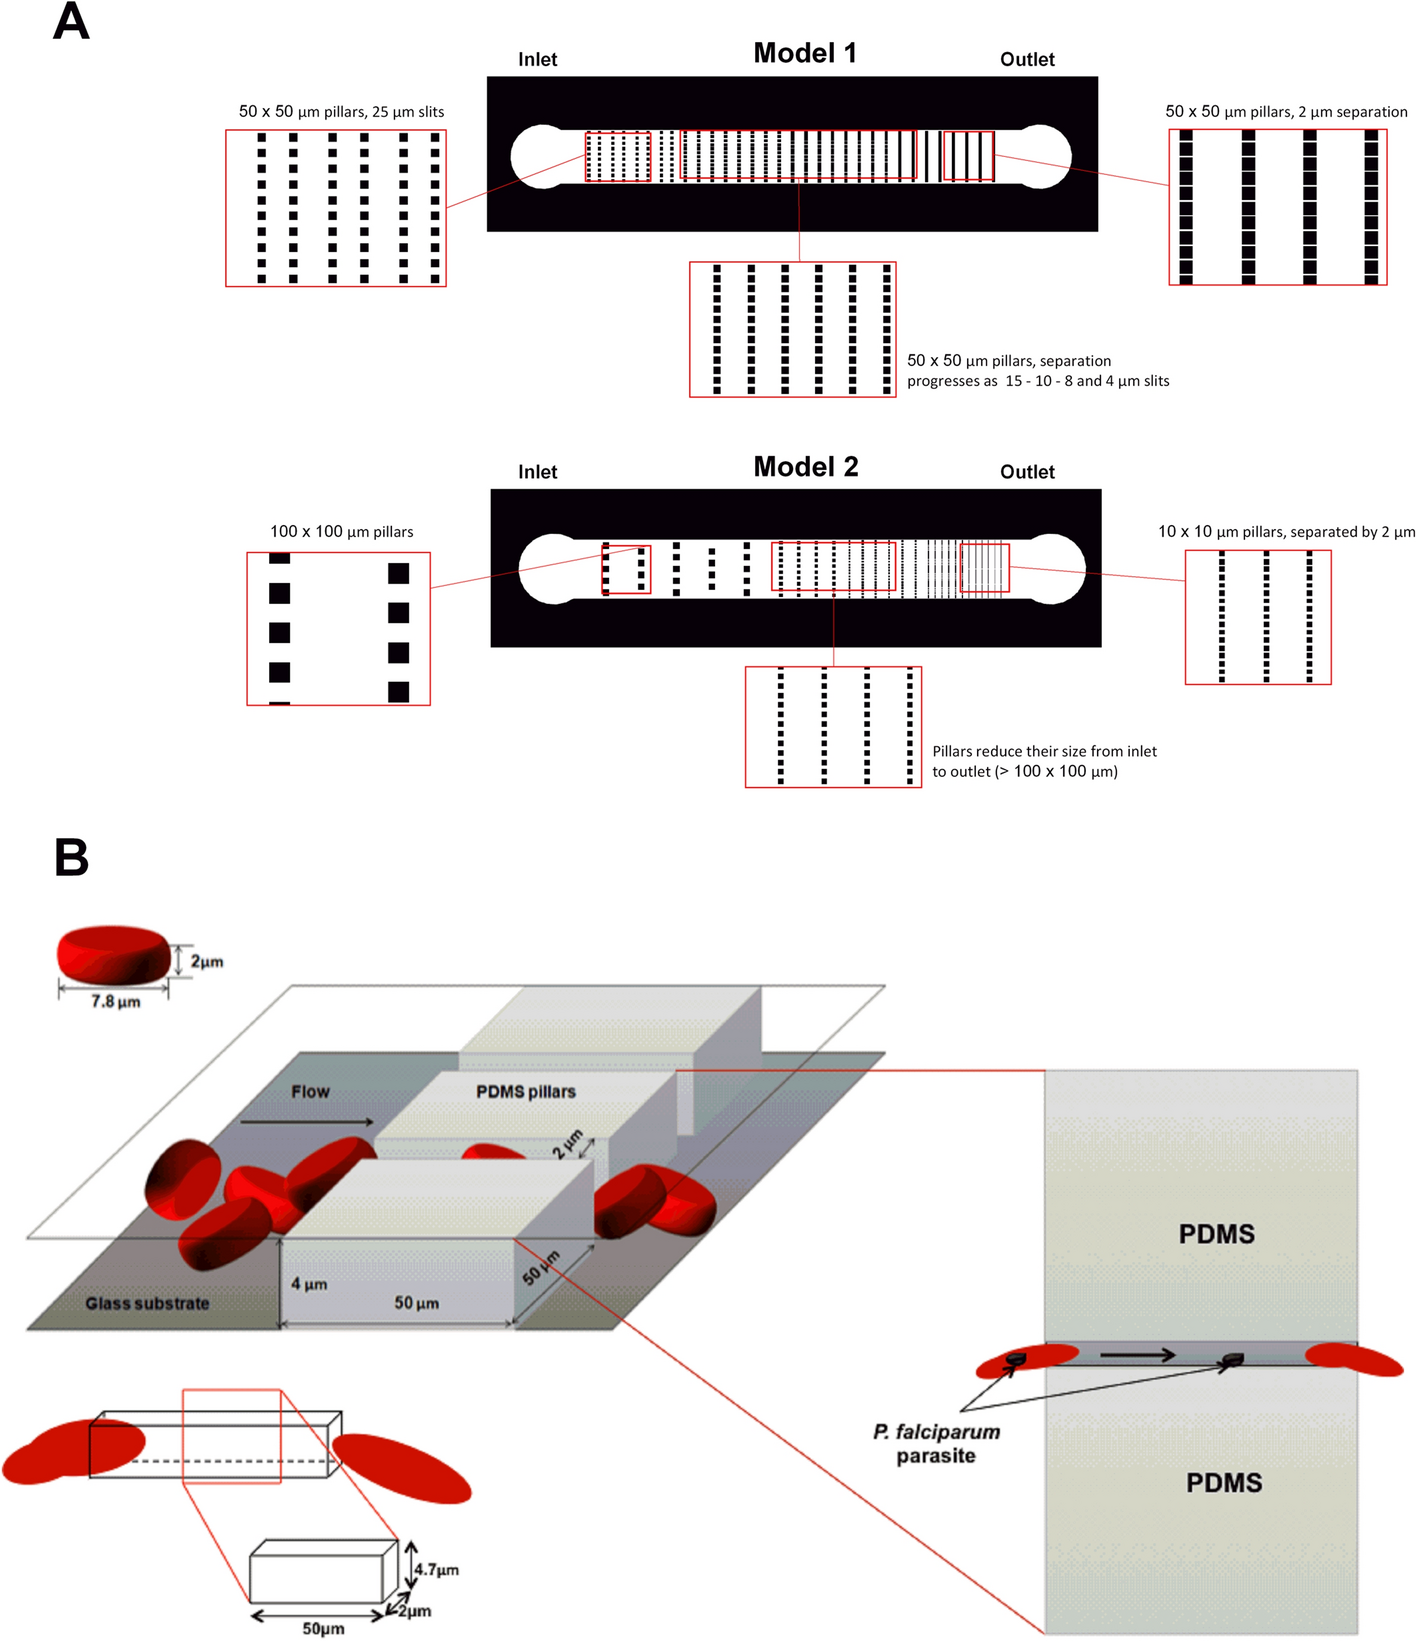 Pitting of malaria parasites in microfluidic devices mimicking interendothelial | Scientific Reports